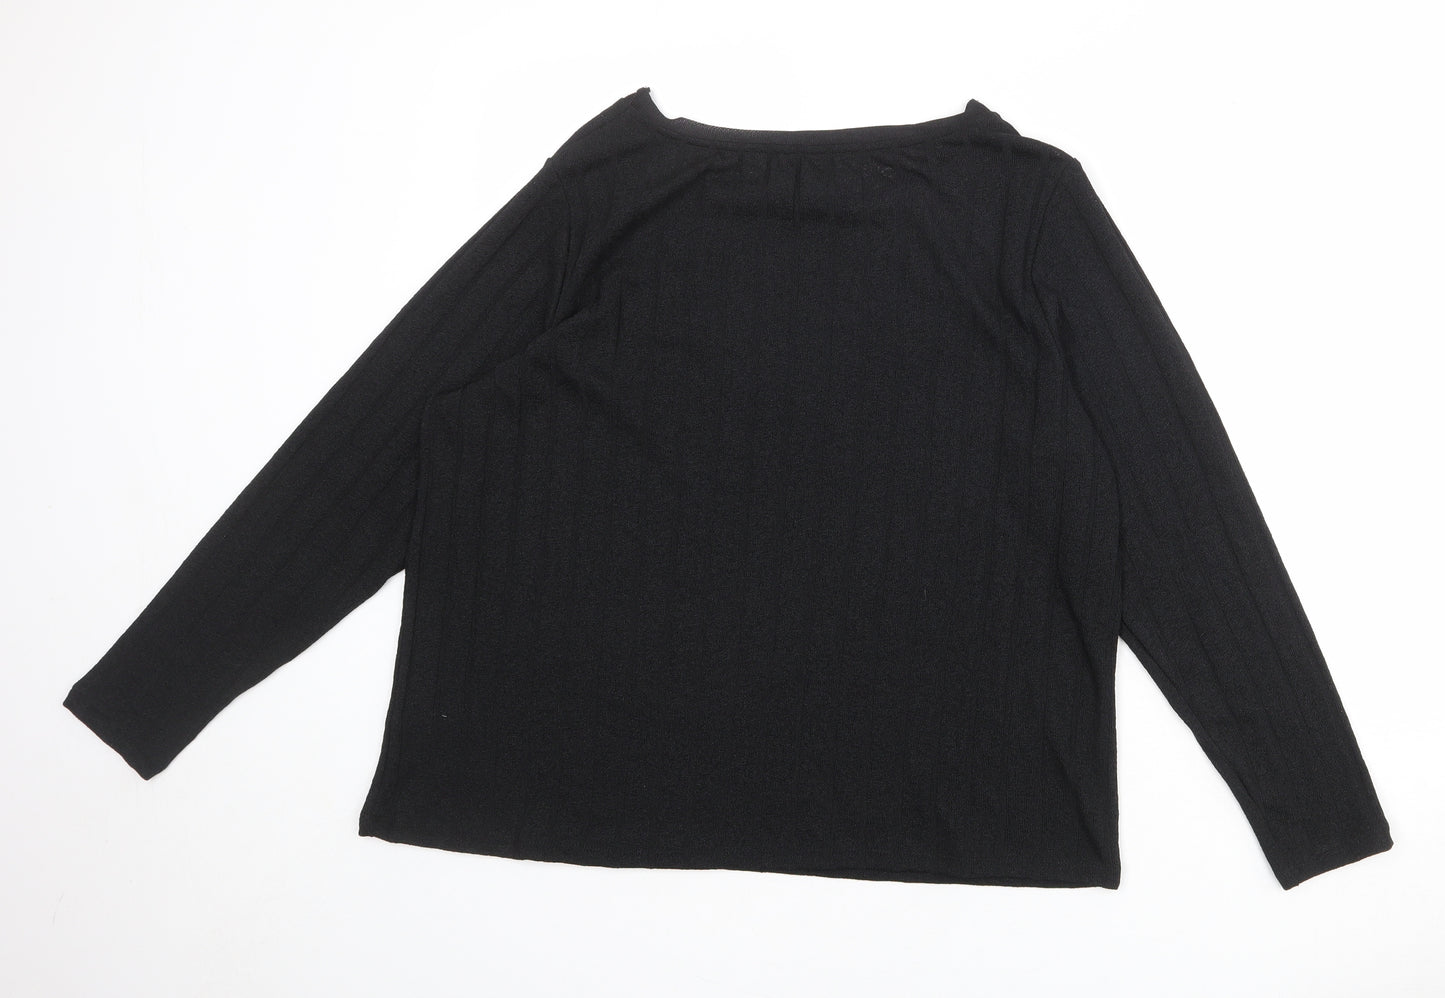 Marks and Spencer Womens Black Round Neck Polyester Pullover Jumper Size 18